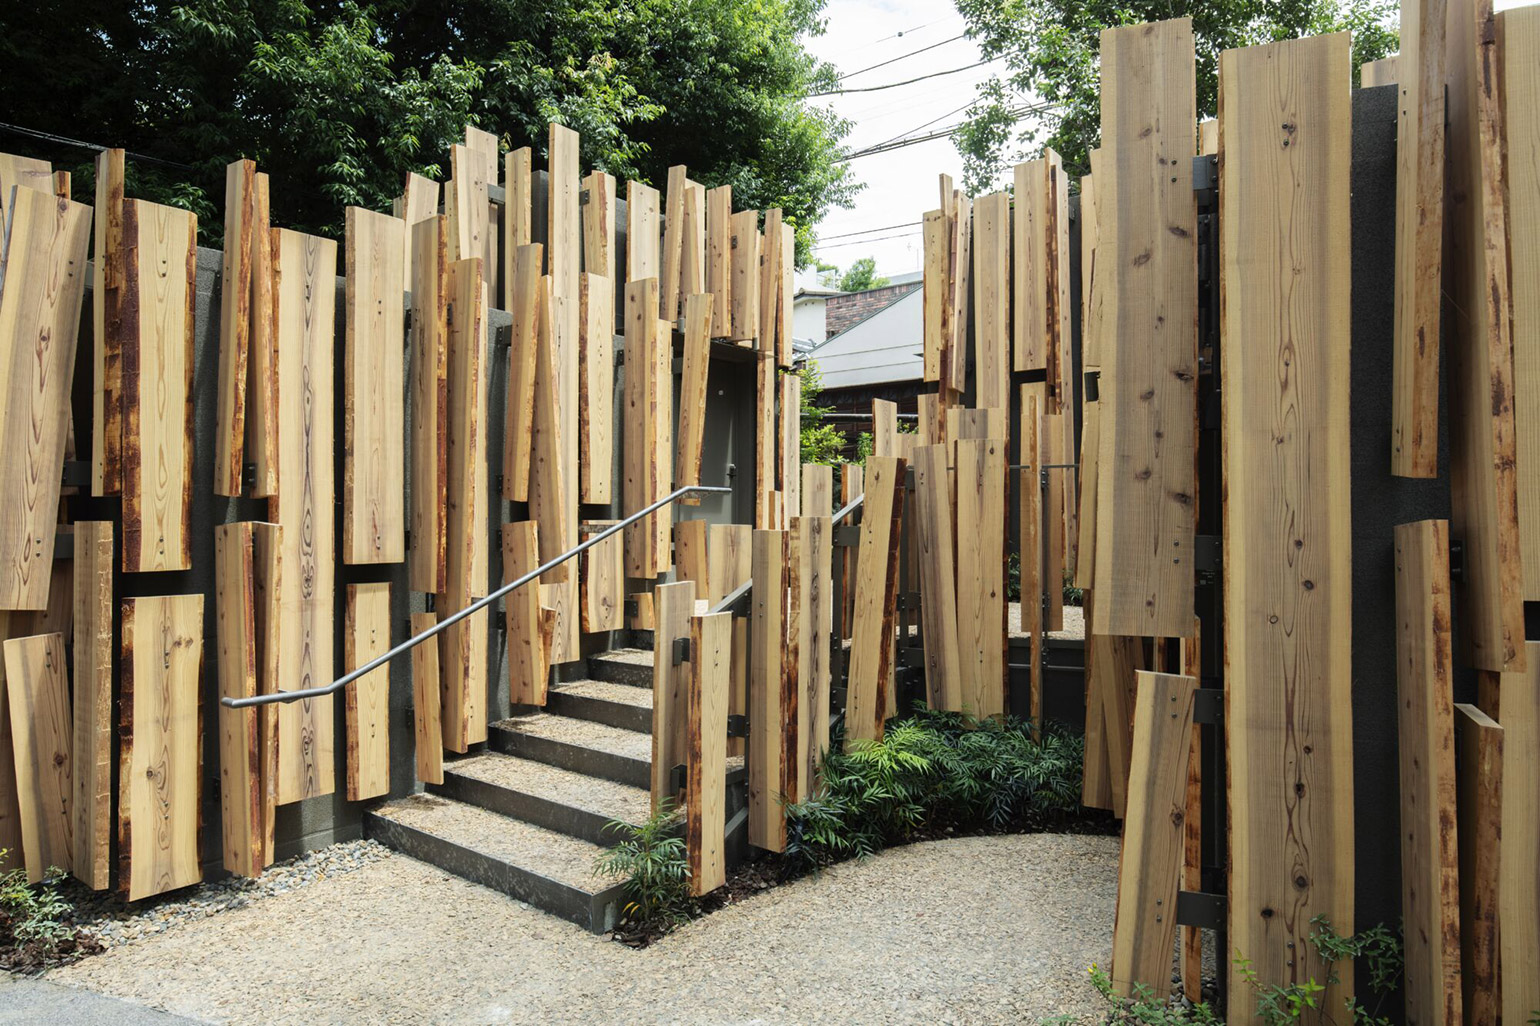 “A Walk in the Woods” — New Addition to The Tokyo Toilet Project from Kengo Kuma